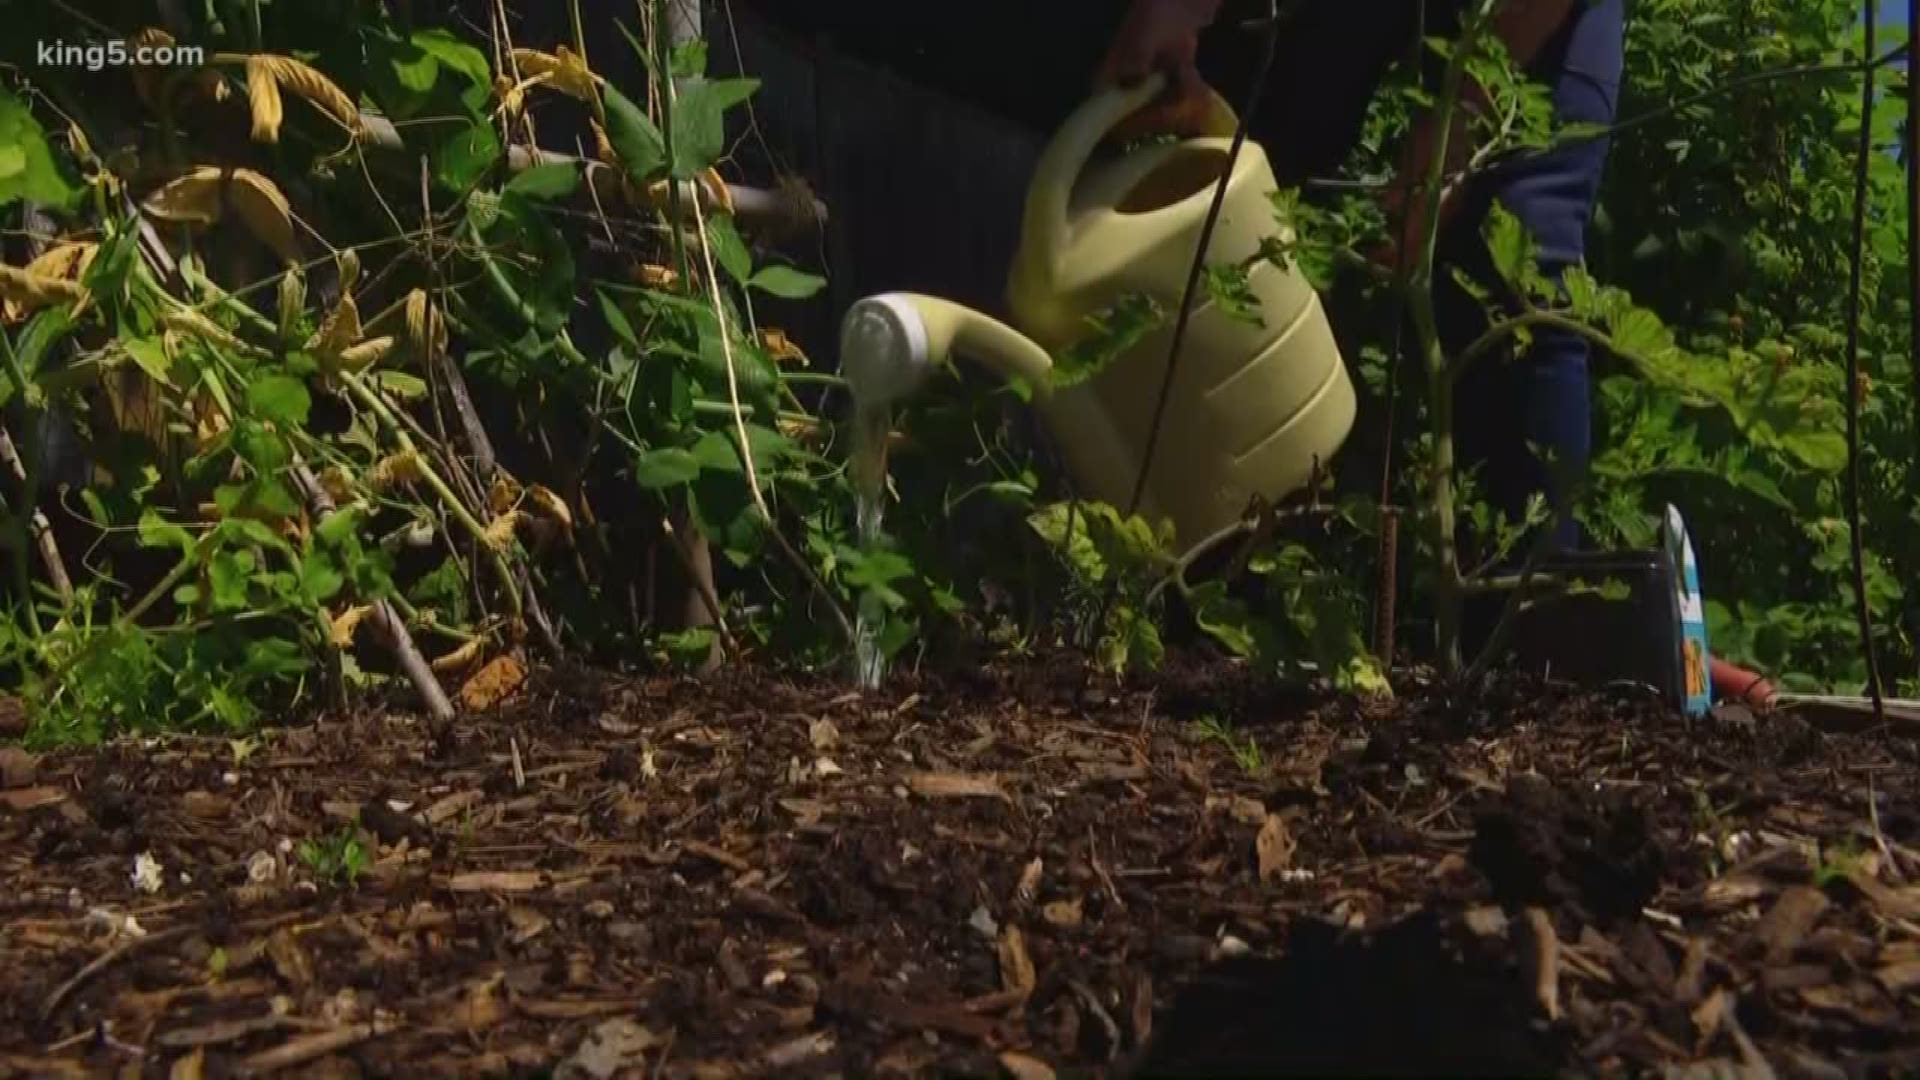 There's a lot to do at the Ballard P-Patch. The garden sits on a half-acre. It grows about 1,300 pounds of food for the Ballard Food Bank and provides space for 85 different gardens. KING 5's Kalie Greenberg reports.